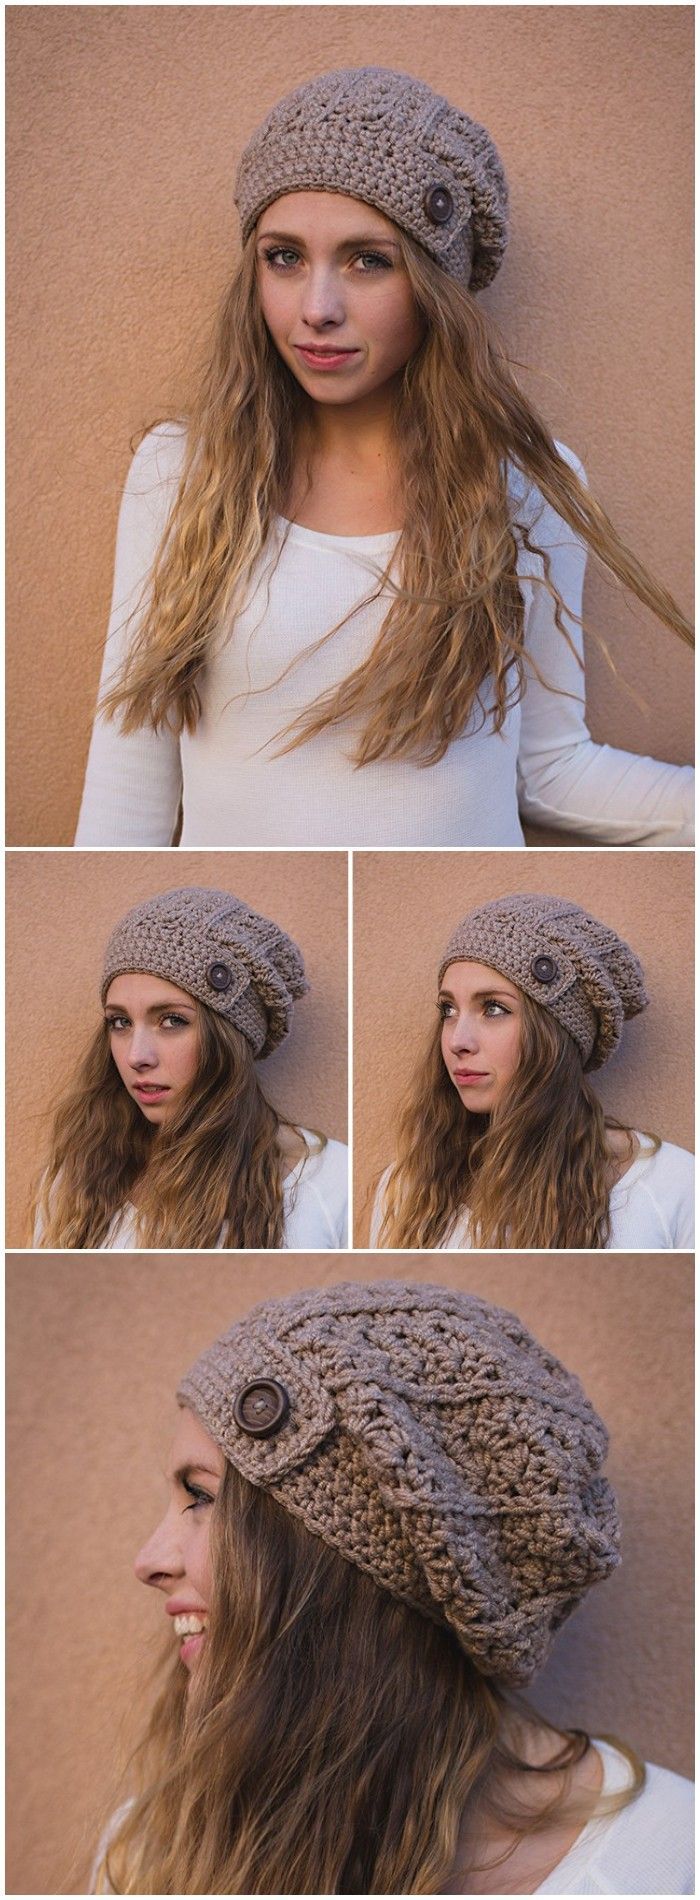 20 Free Crochet Slouchy Hat Patterns -   19 knitting and crochet Free Patterns slouchy beanie ideas